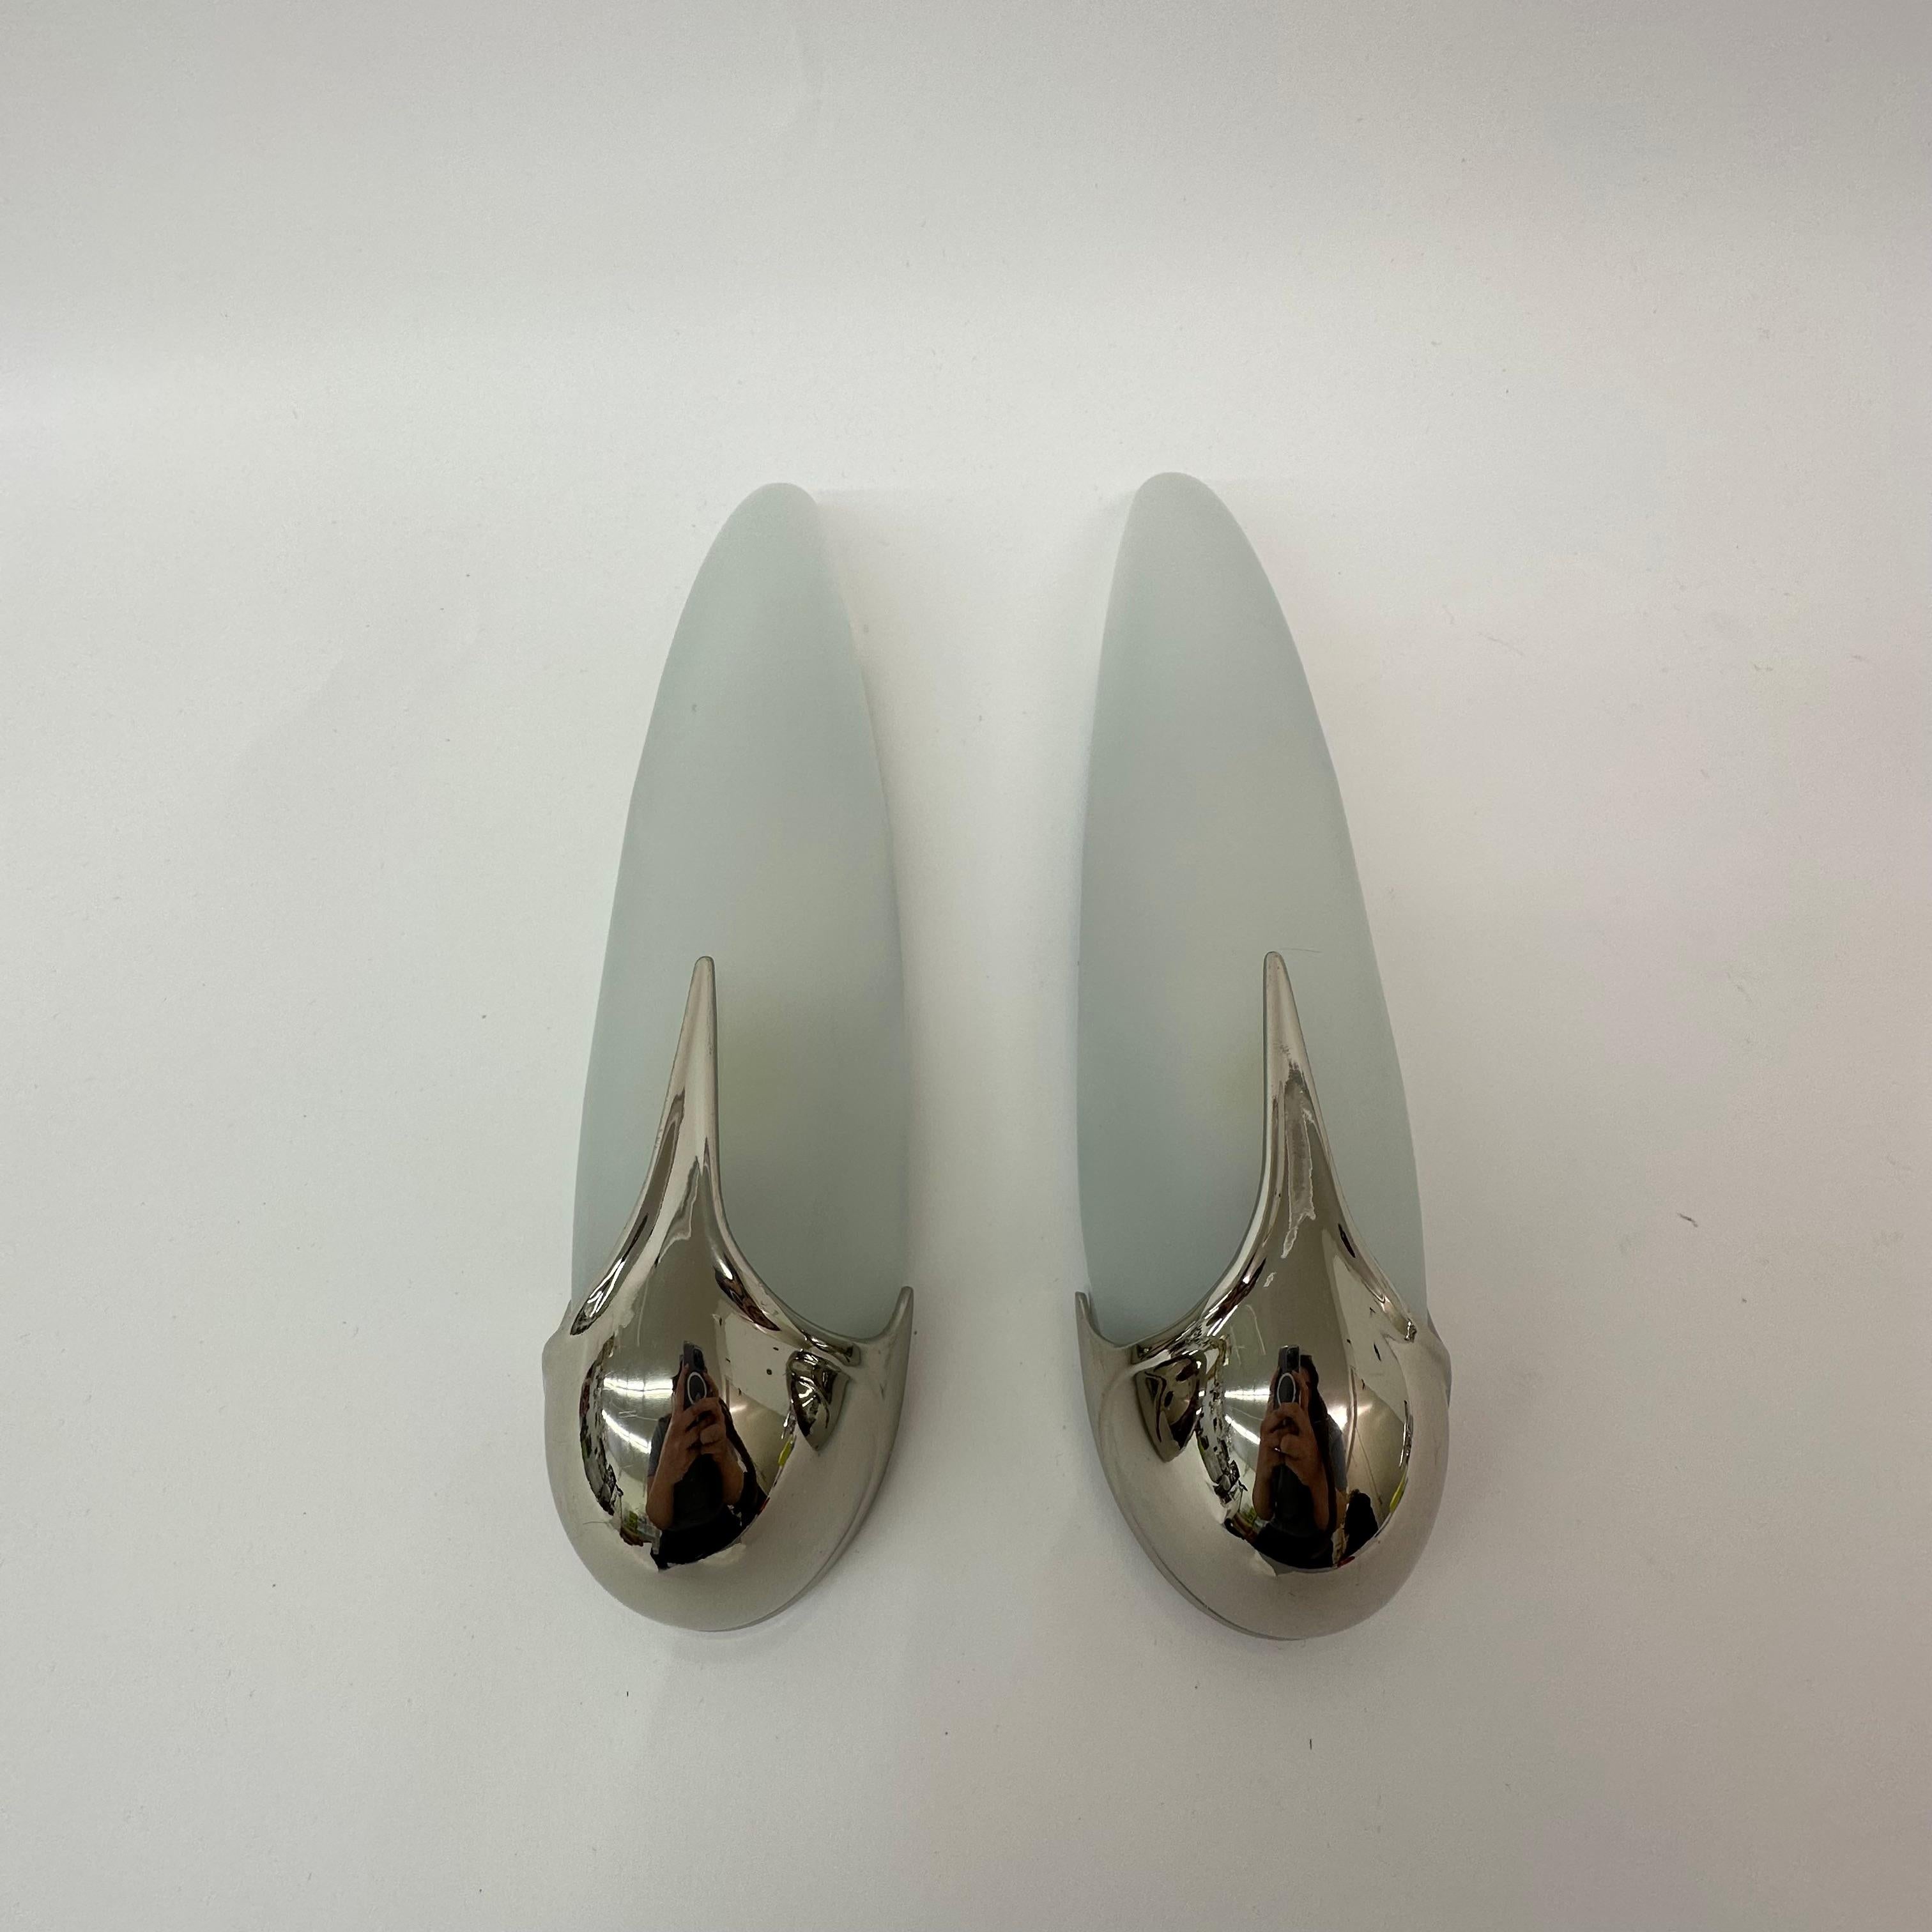 Metal Pair of Idearte Sconces Wall Lamps, Spain, 1980s For Sale